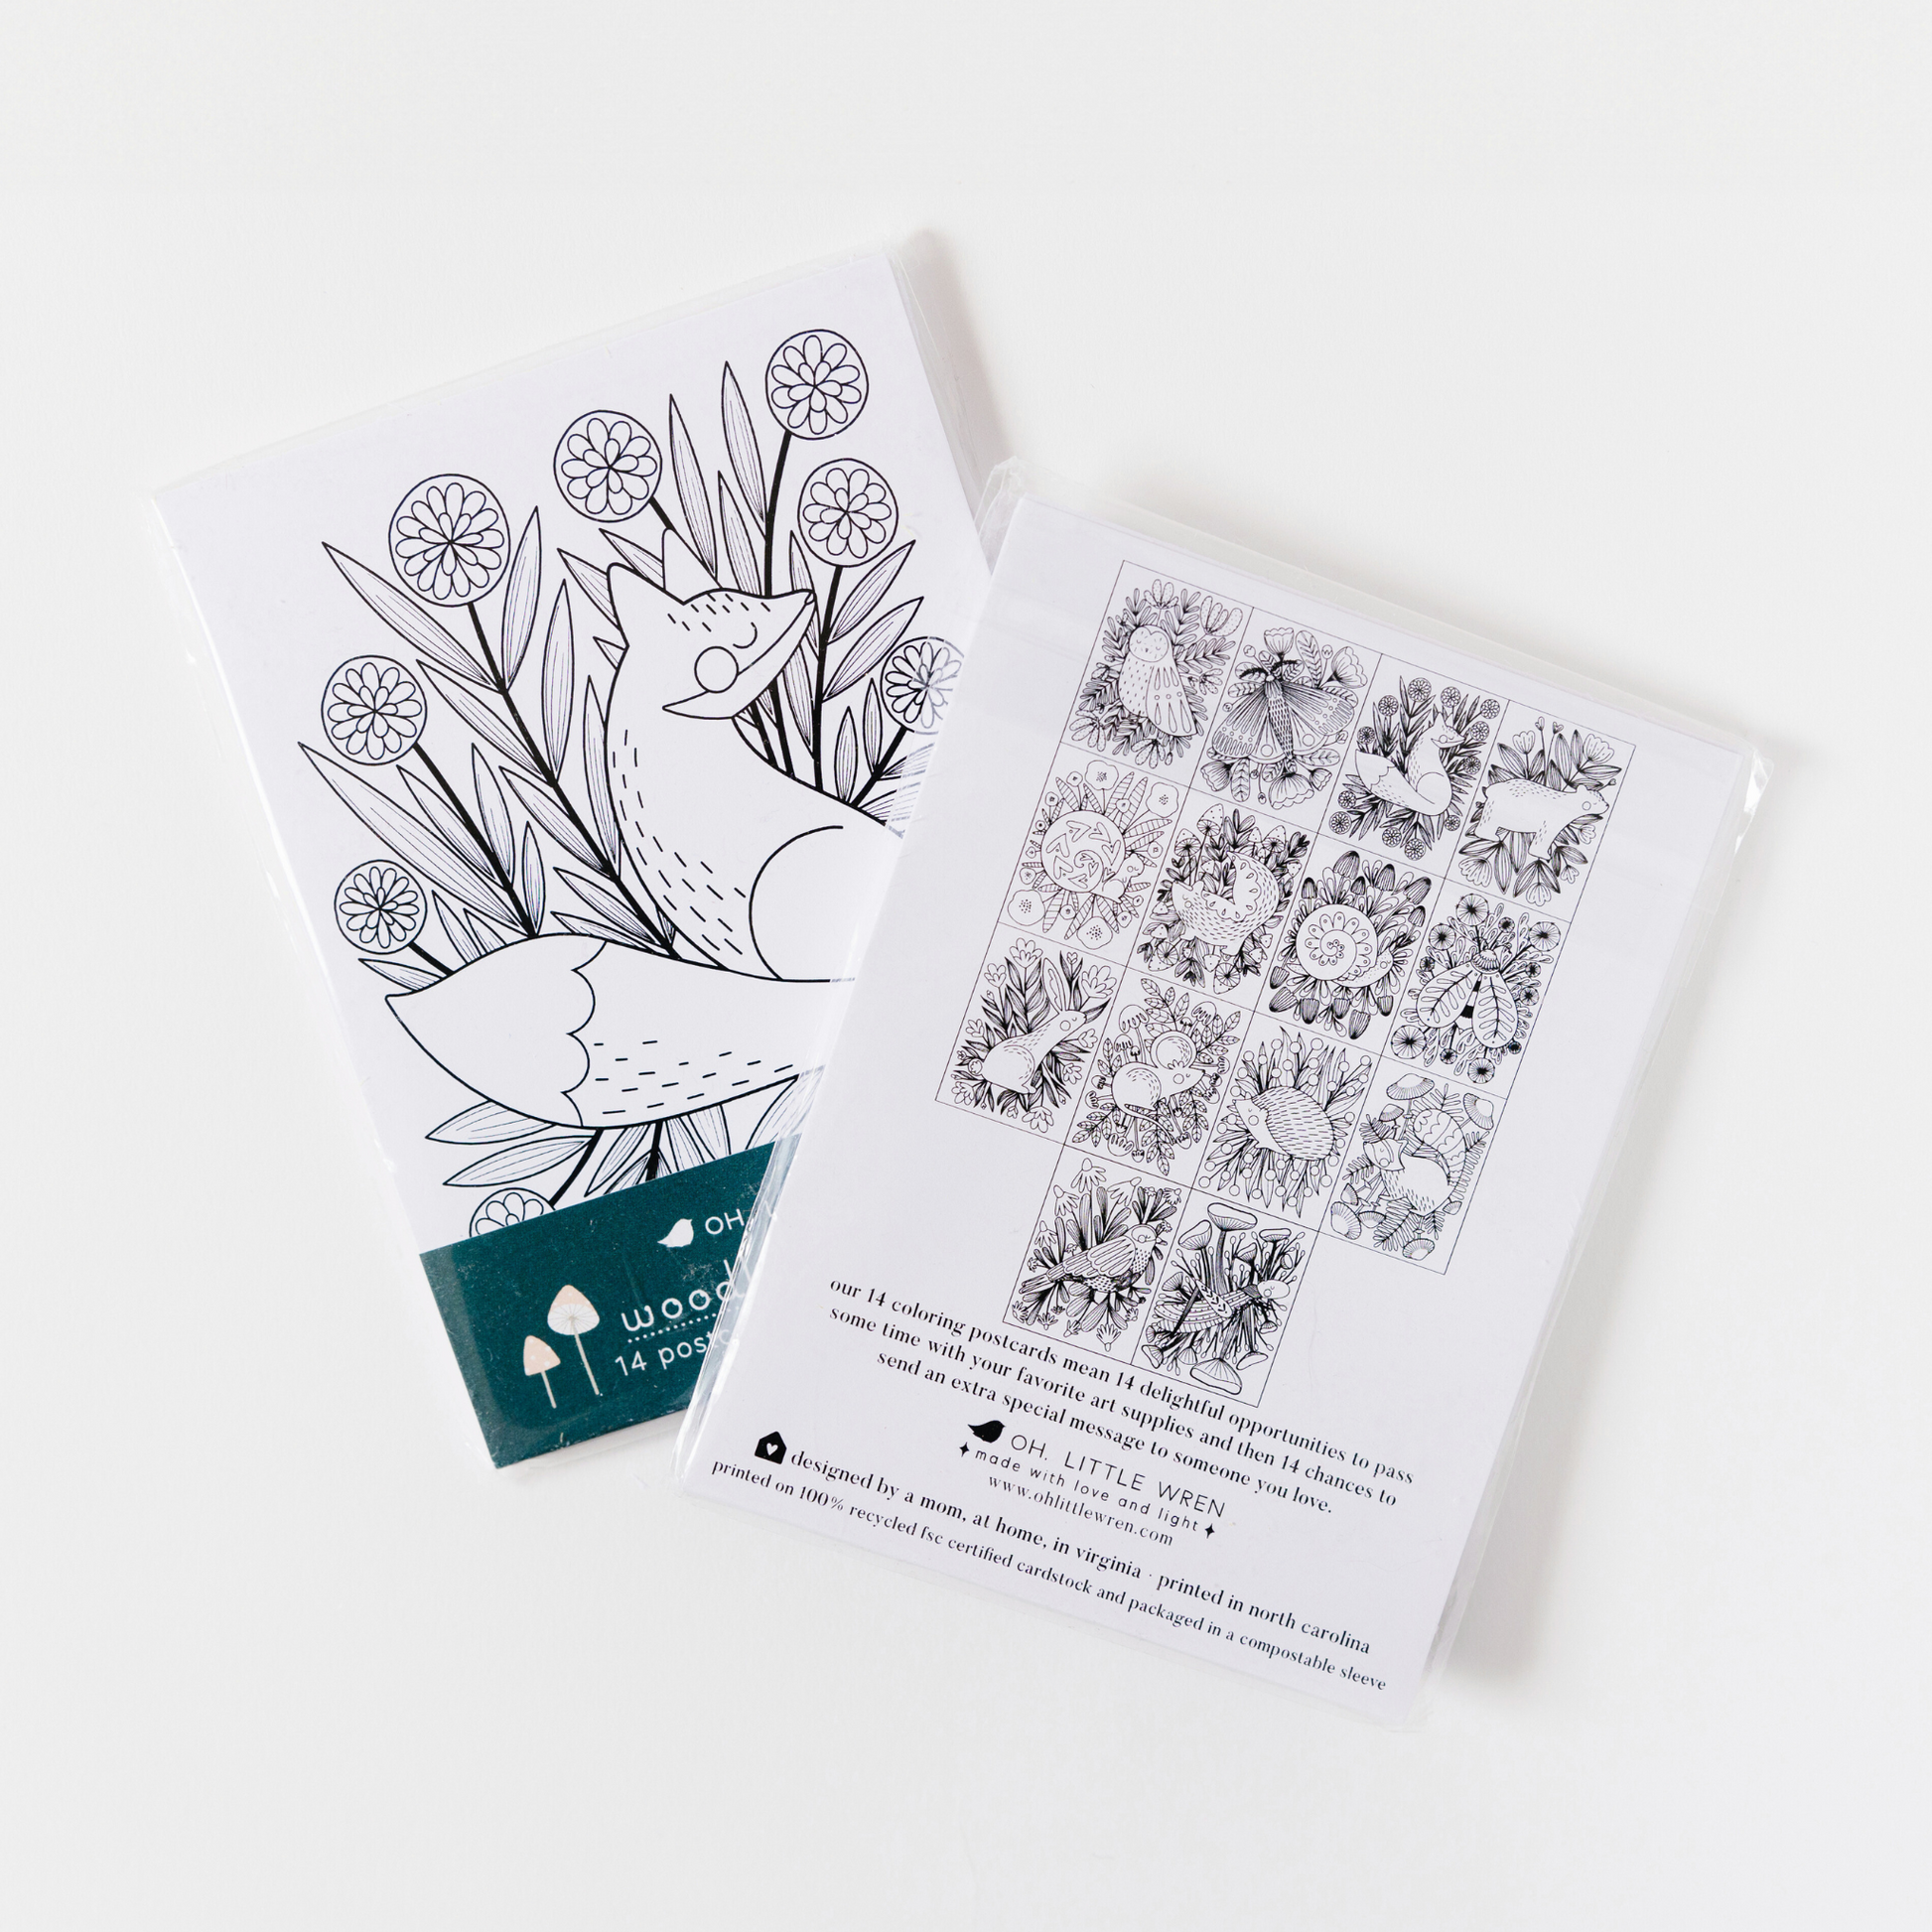 two packs of coloring postcards are arranged on a white background. the first pack shows the front of the packaging, with the fox postcard. the second shows the back of the packing showing all 14 designs.